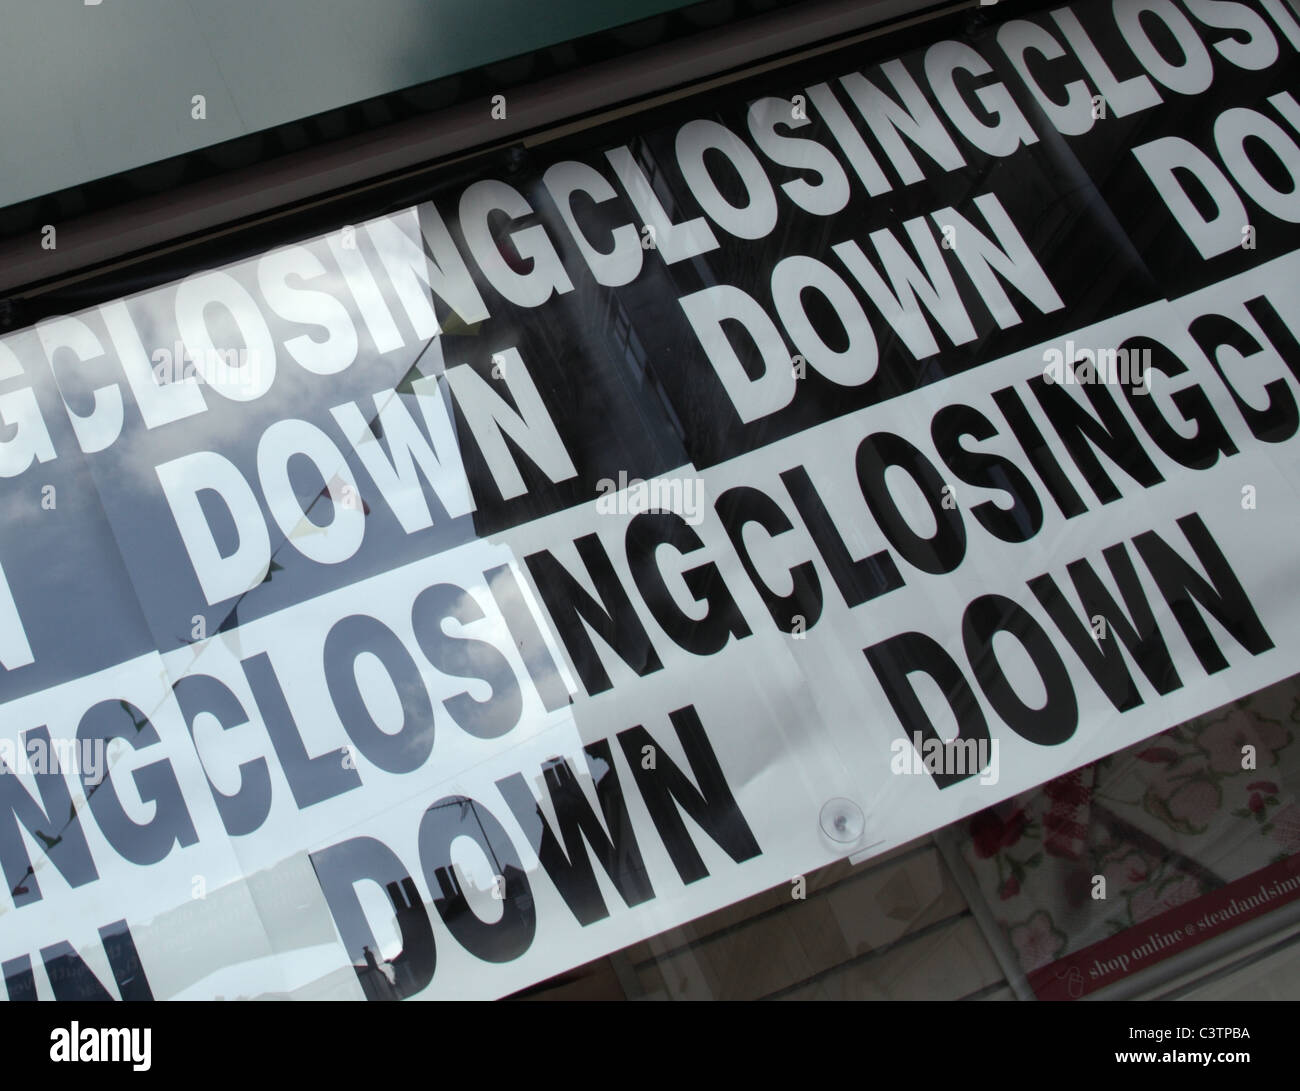 Closing Down sign in retail shop window Stock Photo